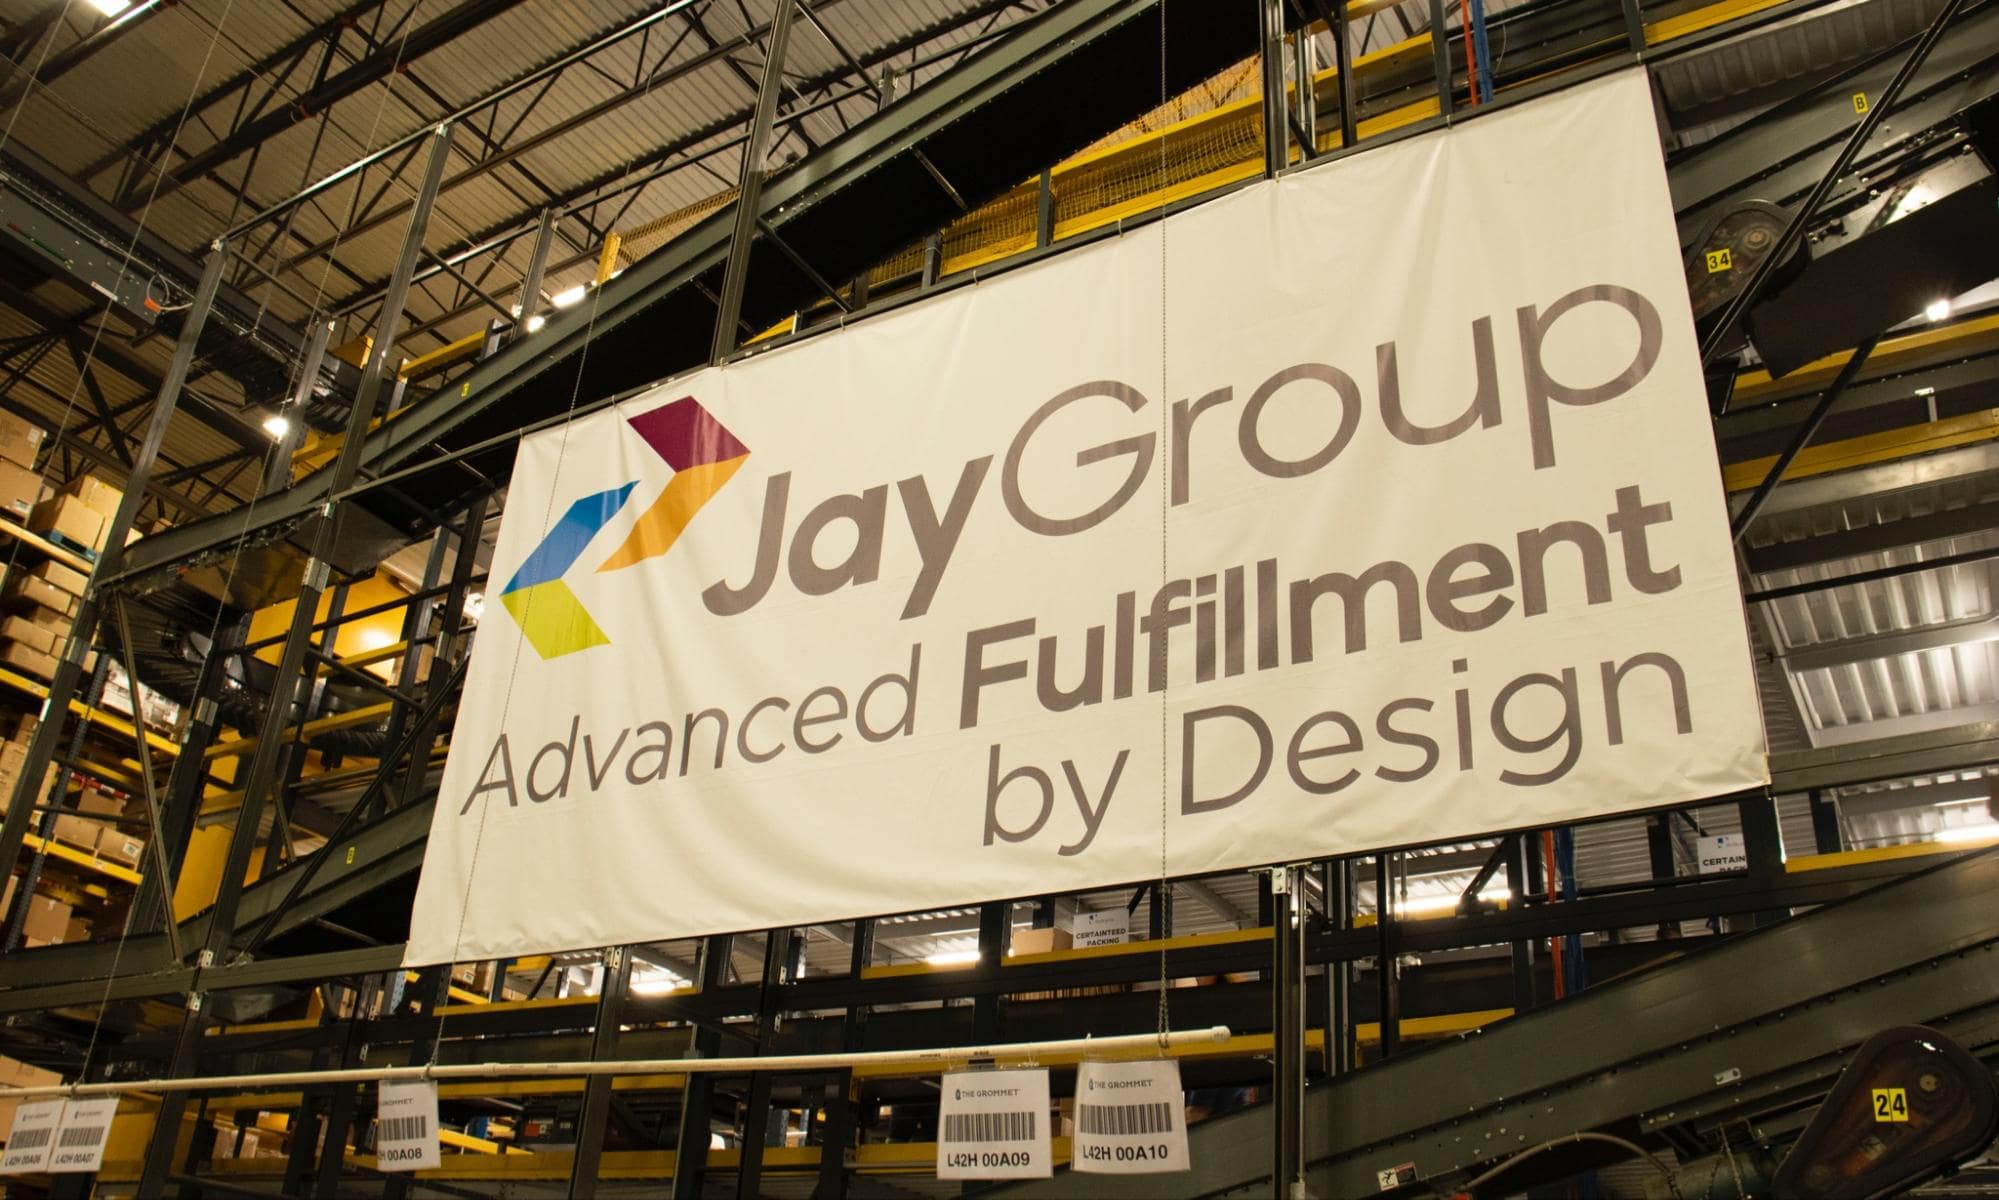 A Jay Group sign hanging in their warehouse.